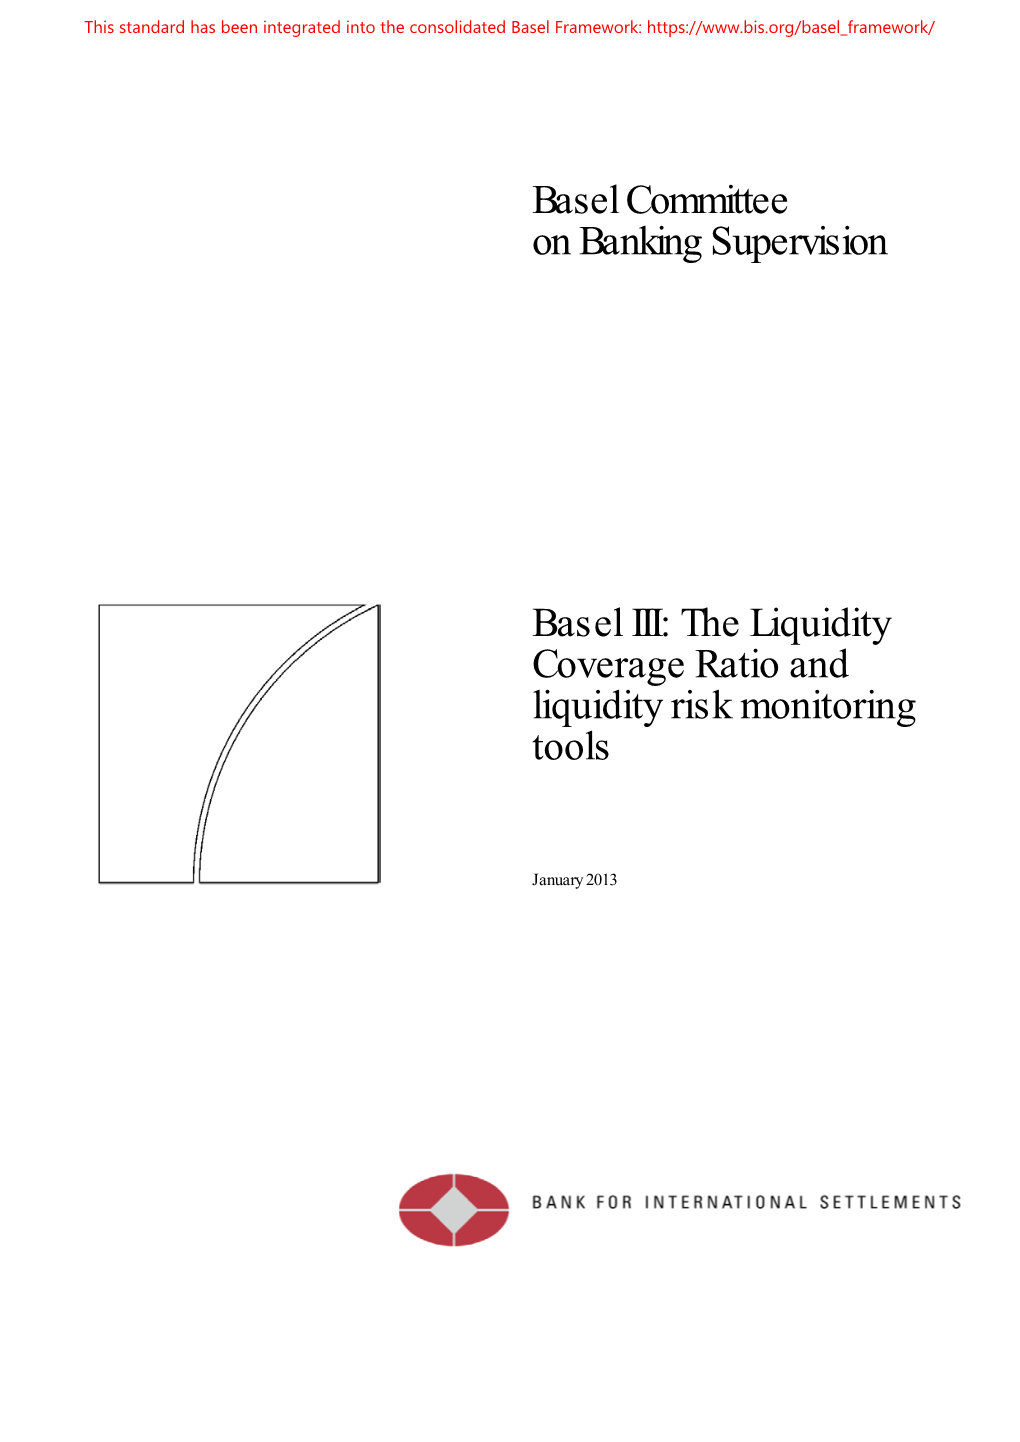 Basel III: the Liquidity Coverage Ratio and Liquidity Risk Monitoring Tools